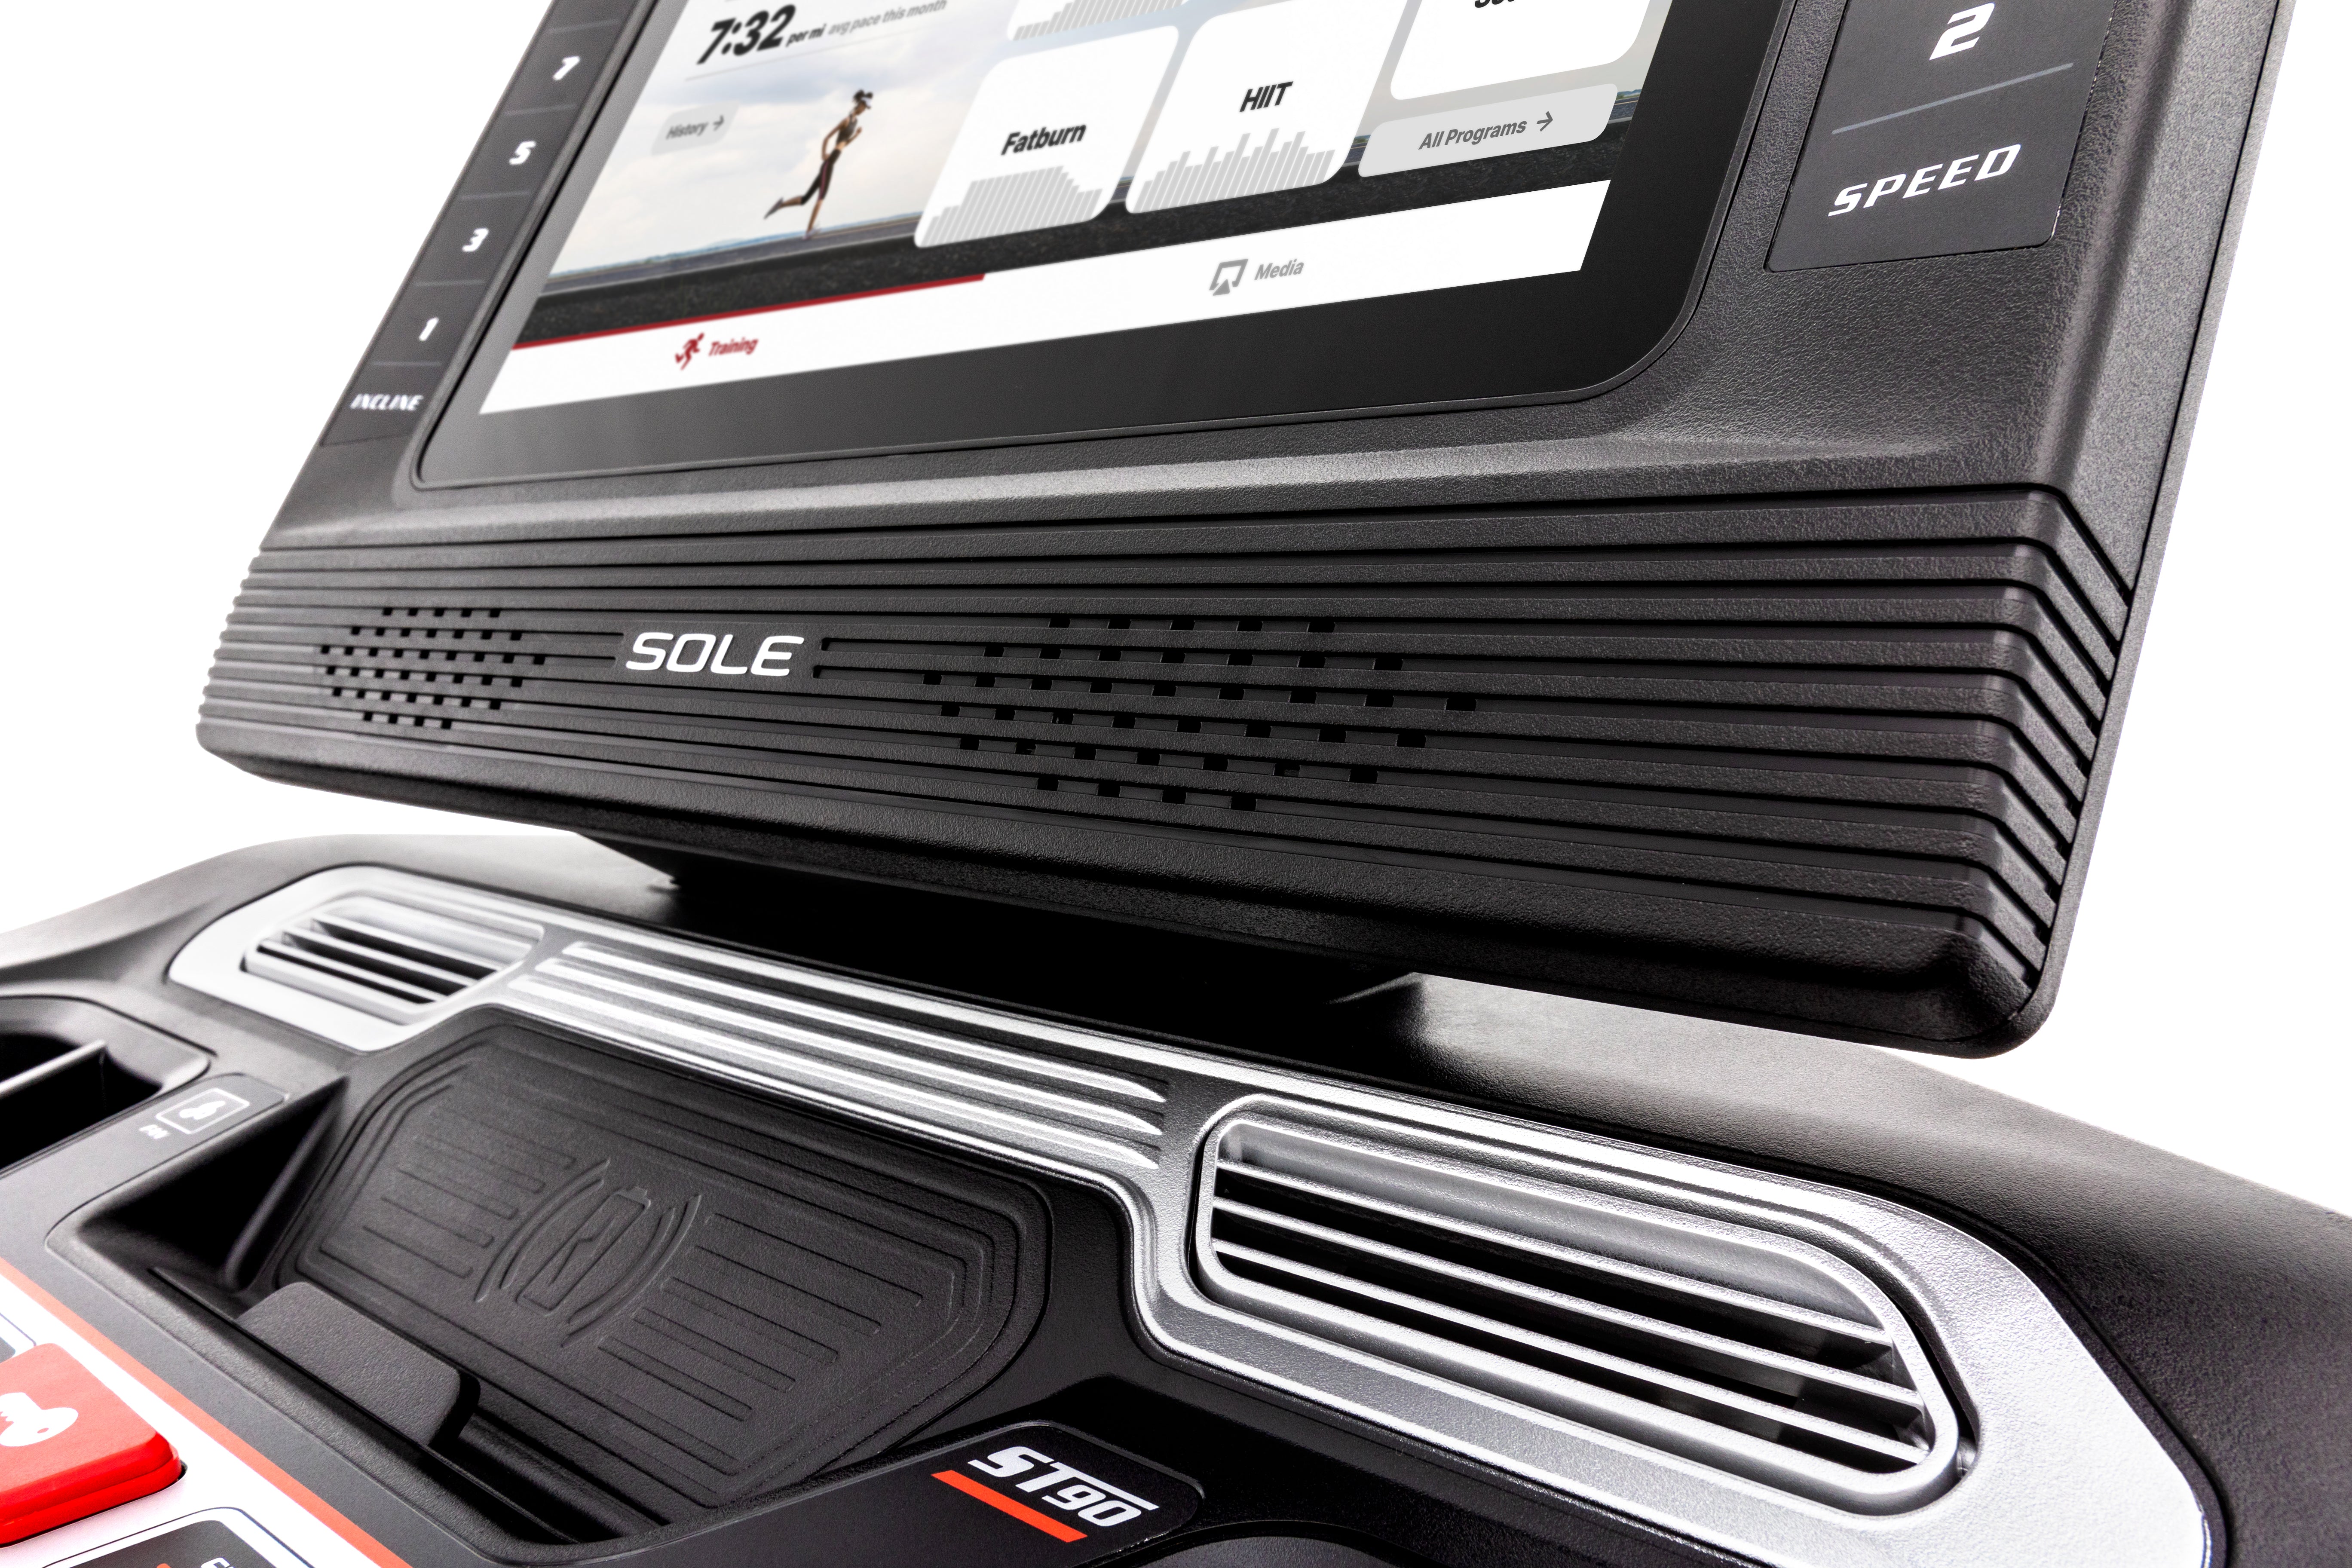 Angled view of the Sole ST90 treadmill's control panel, featuring a digital screen displaying a running feedback, tactile start and stop buttons, cup holders, and the safety key attachment on a sleek black design with silver accents.